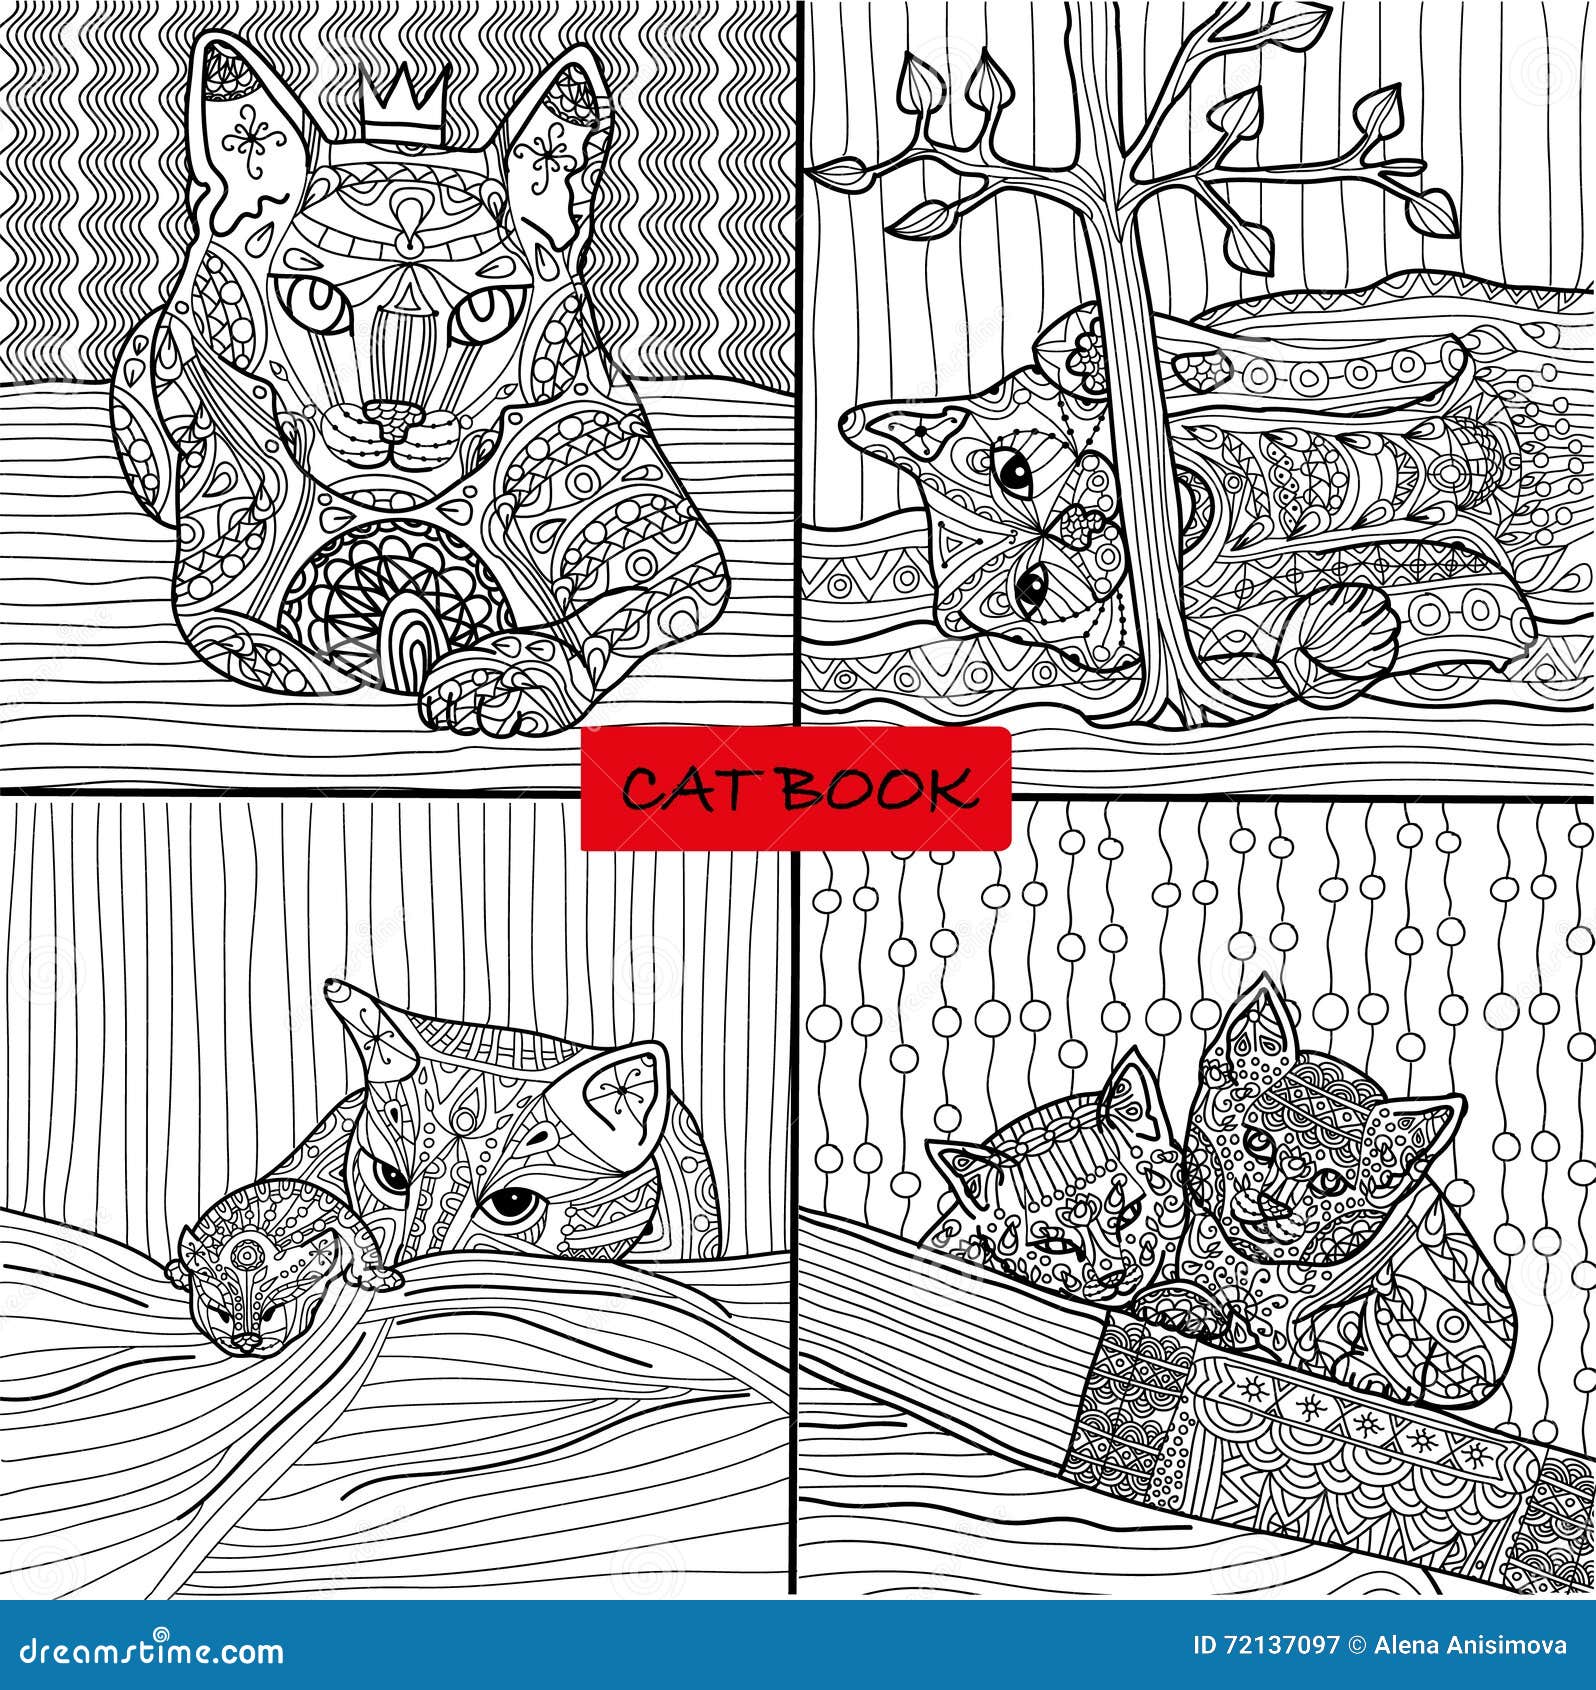 Download Coloring Book For Adults - 2 Set Of Four Drawings Coloring Cat Pages For Adults And Children ...